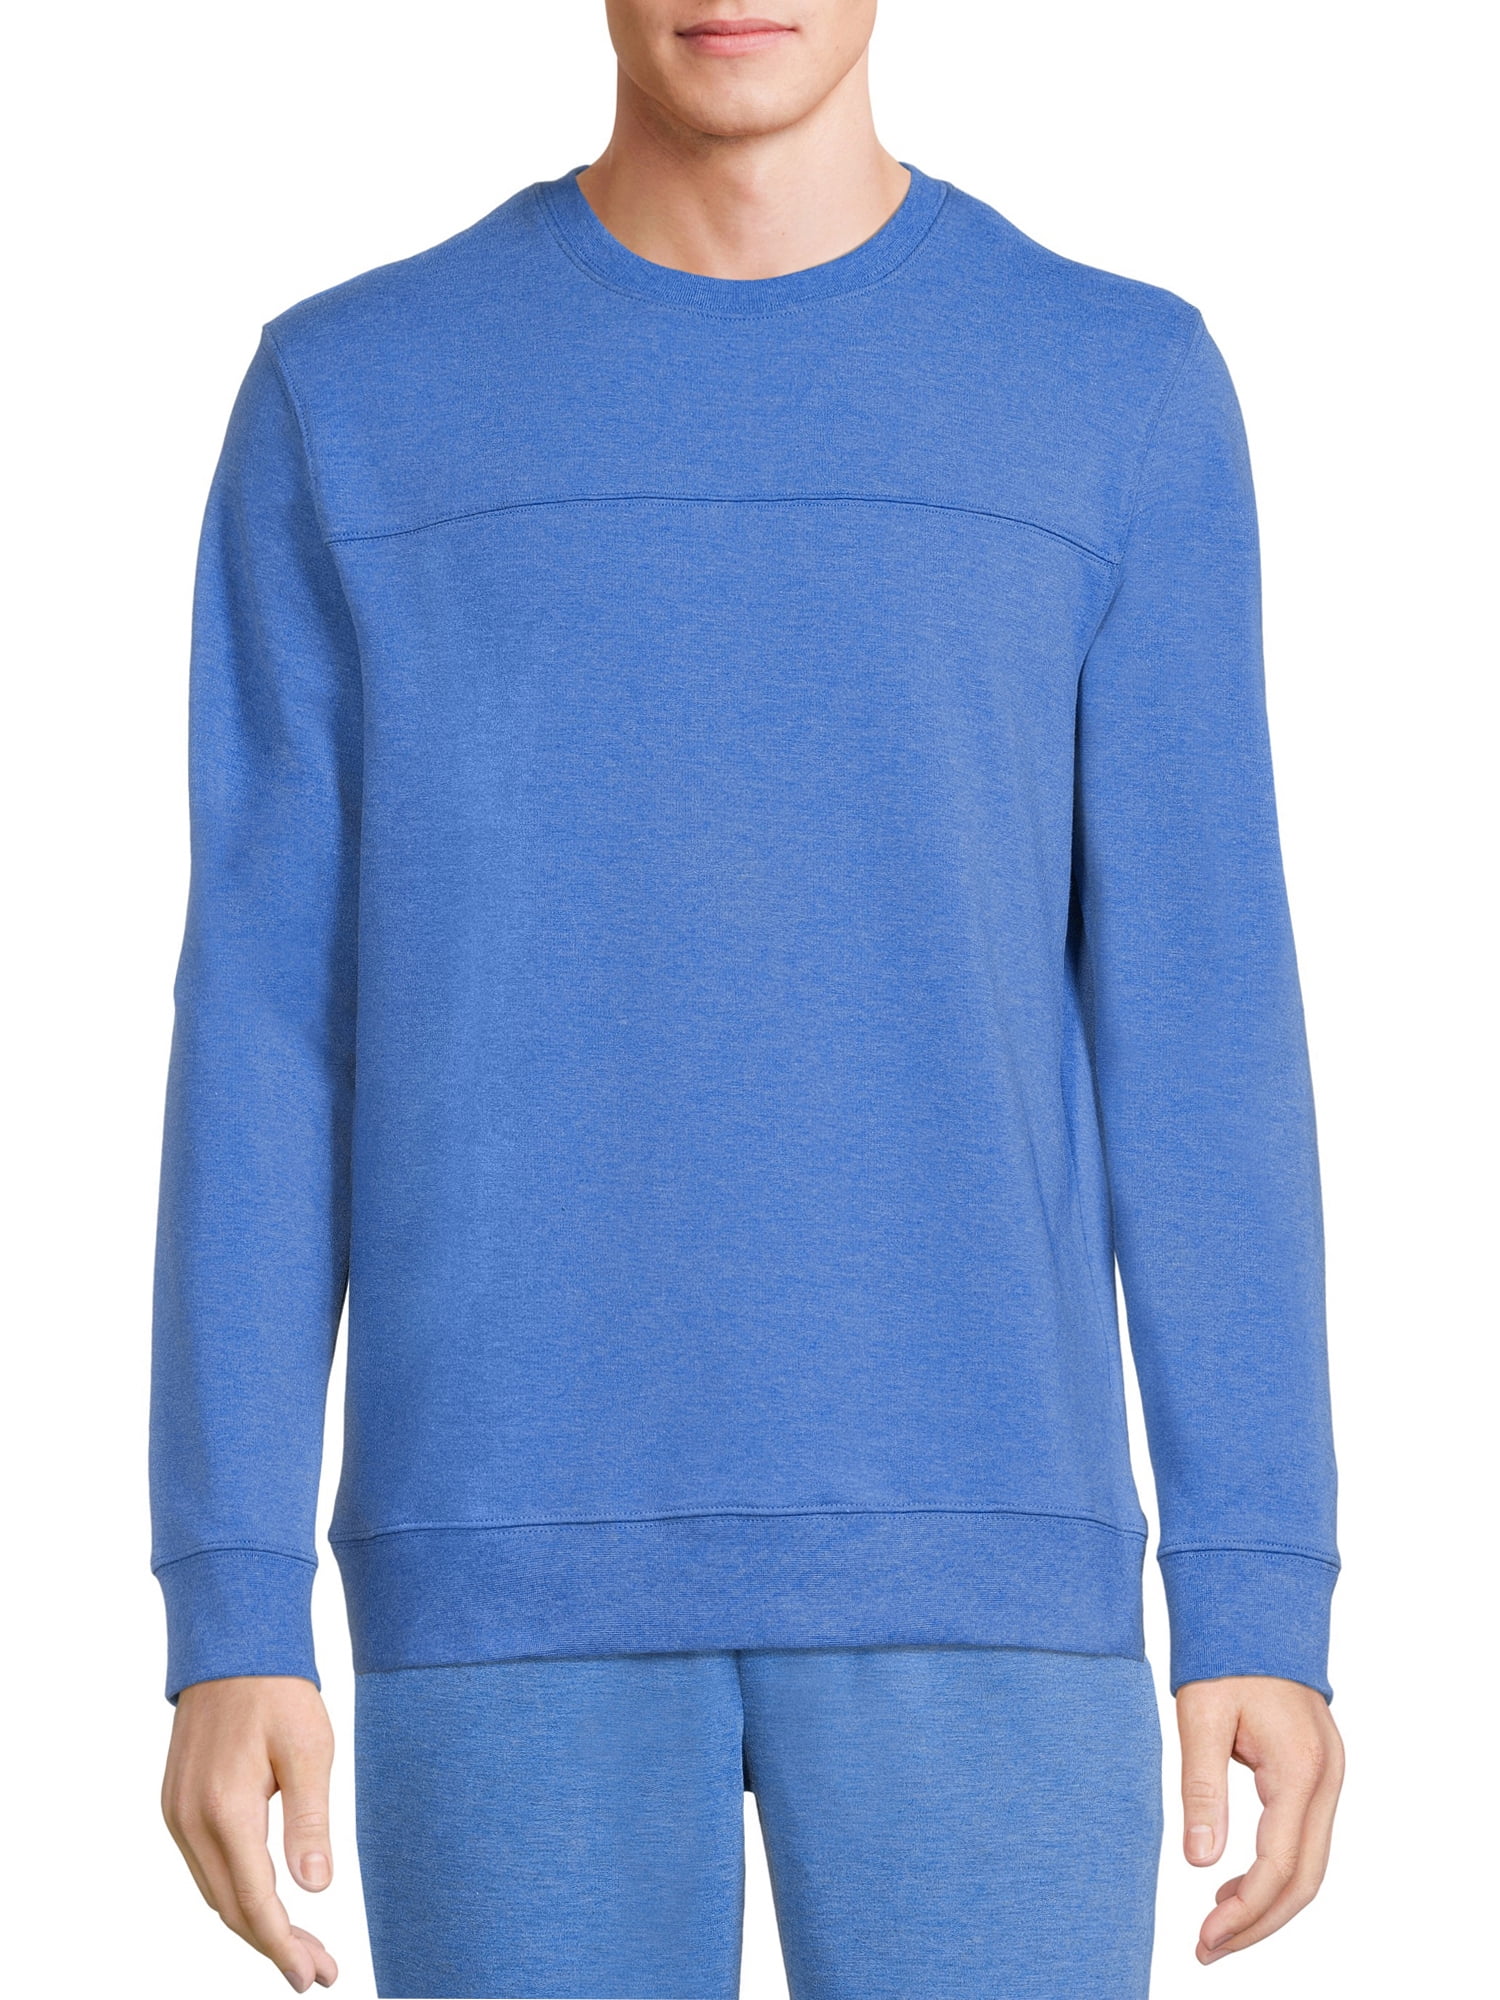 Athletic Works Men's and Big Men's French Terry Crewneck Sweatshirt, up ...